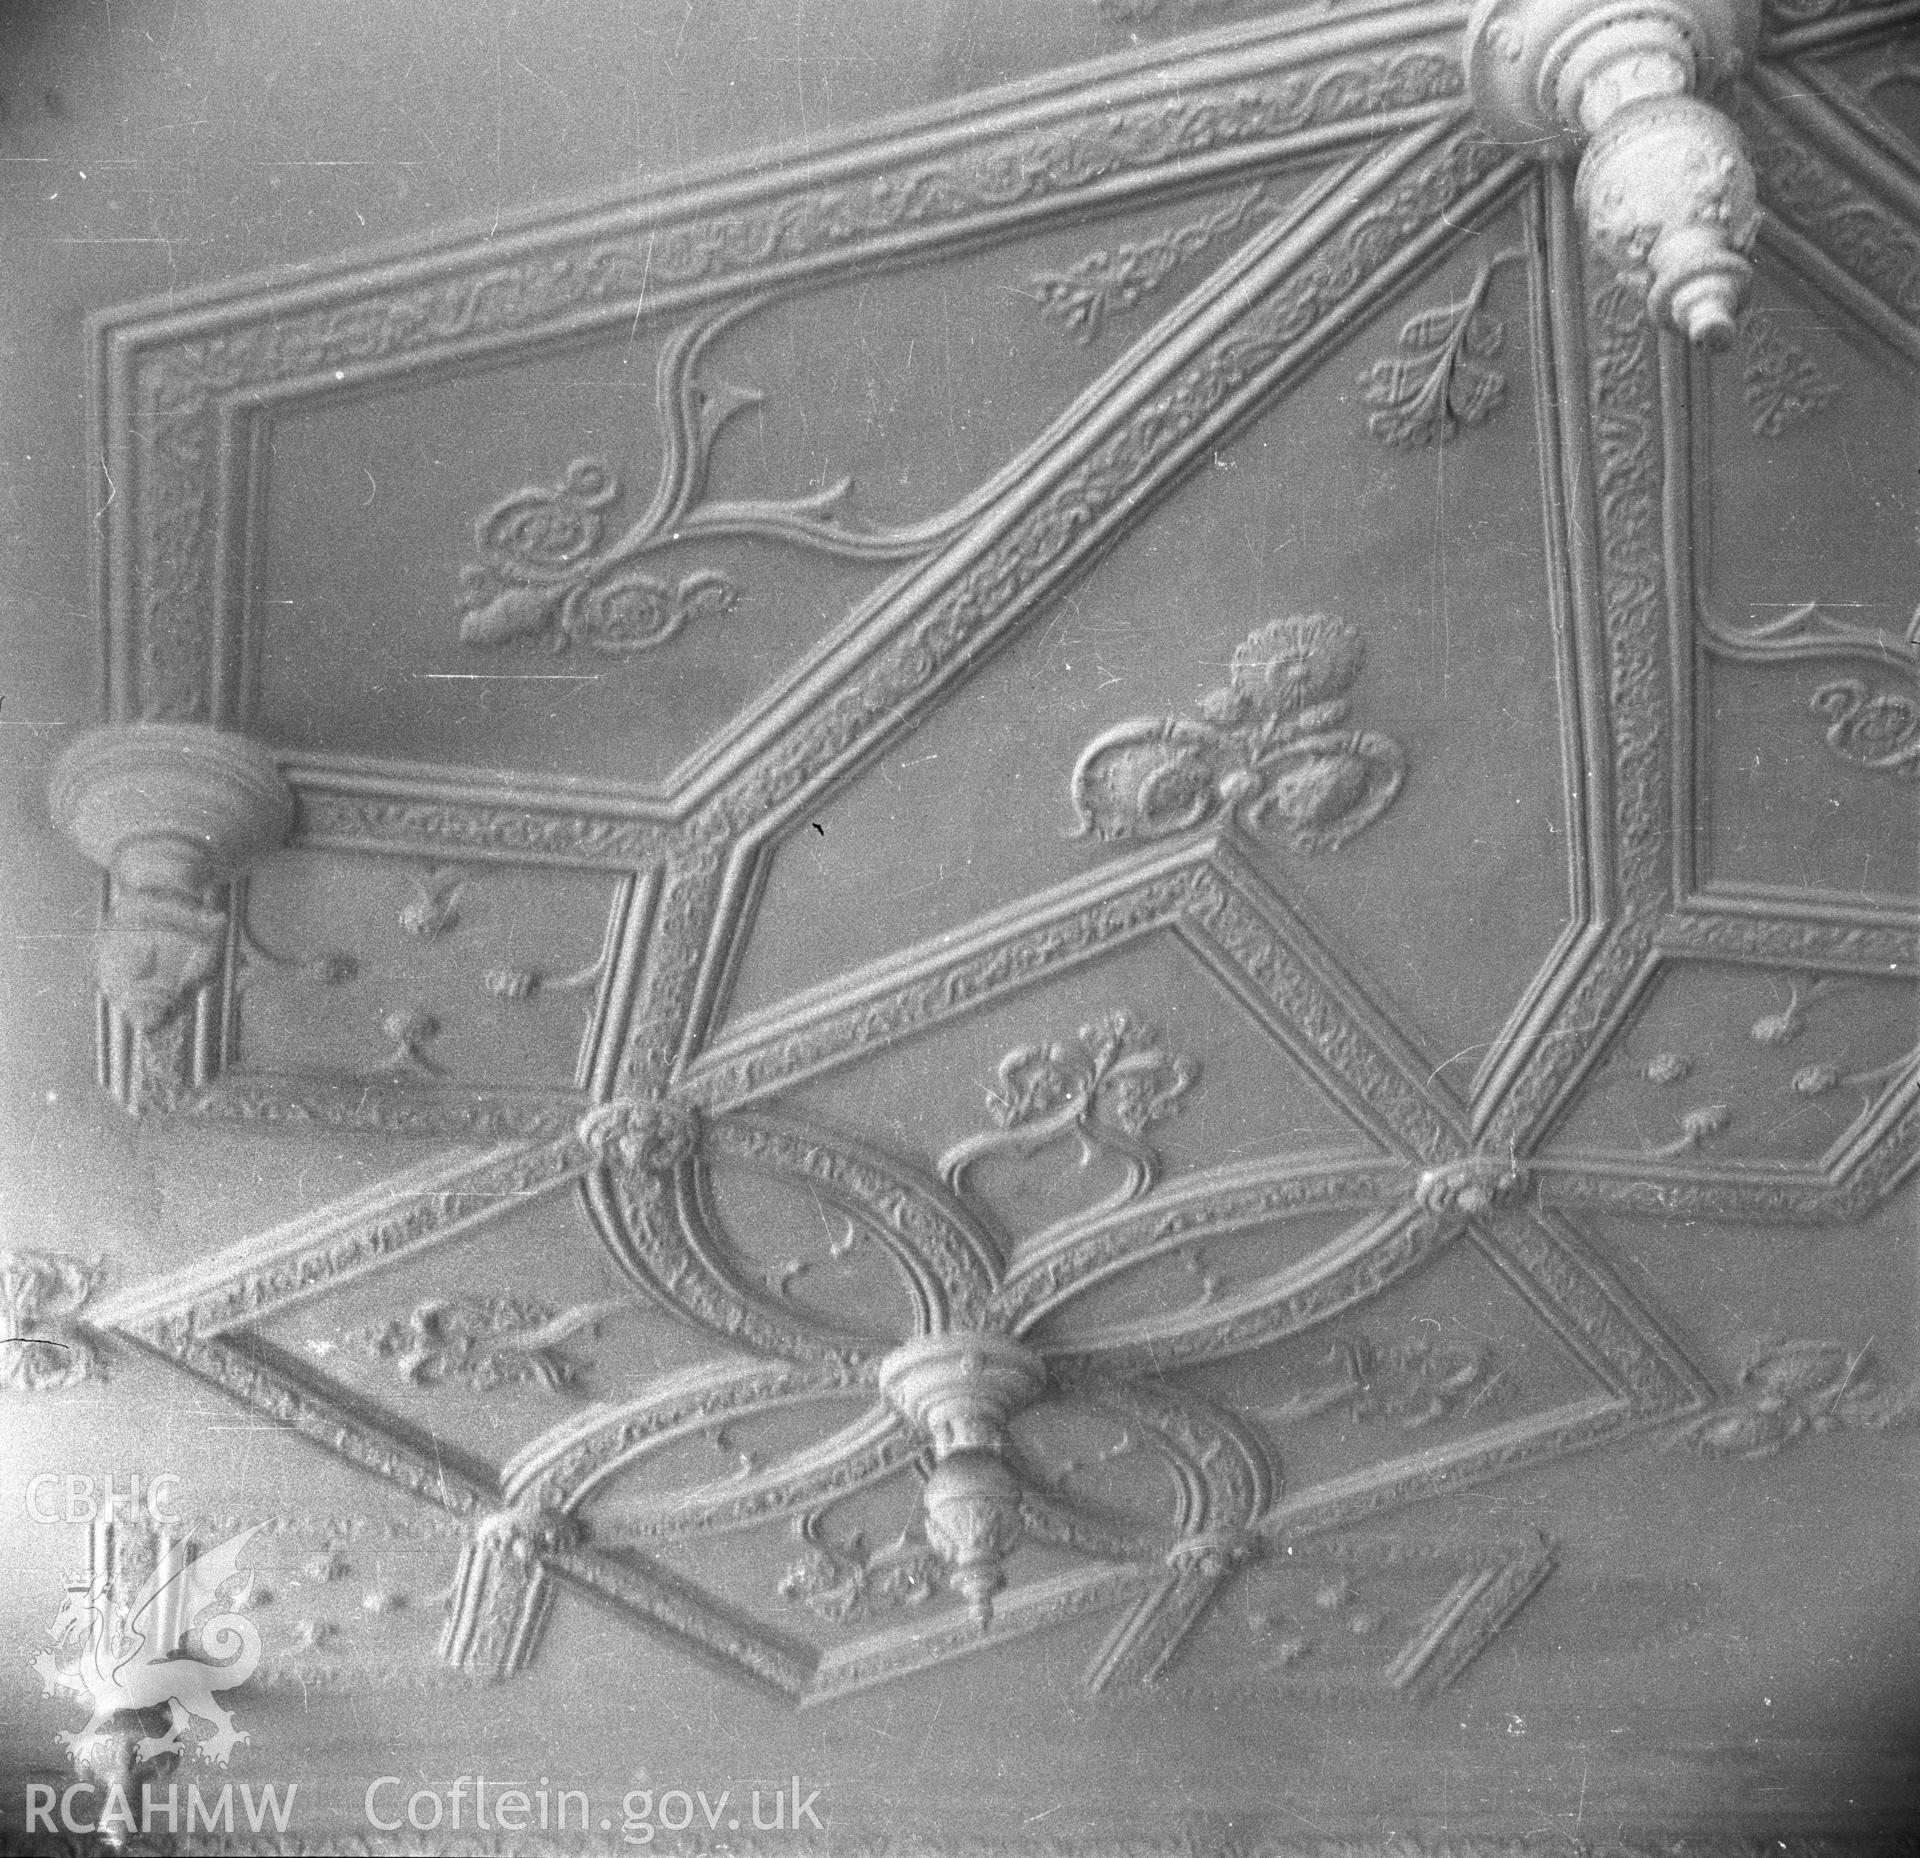 Digital copy of an undated nitrate negative showing a view of plaster ceiling at Treowen, Monmouthshire.